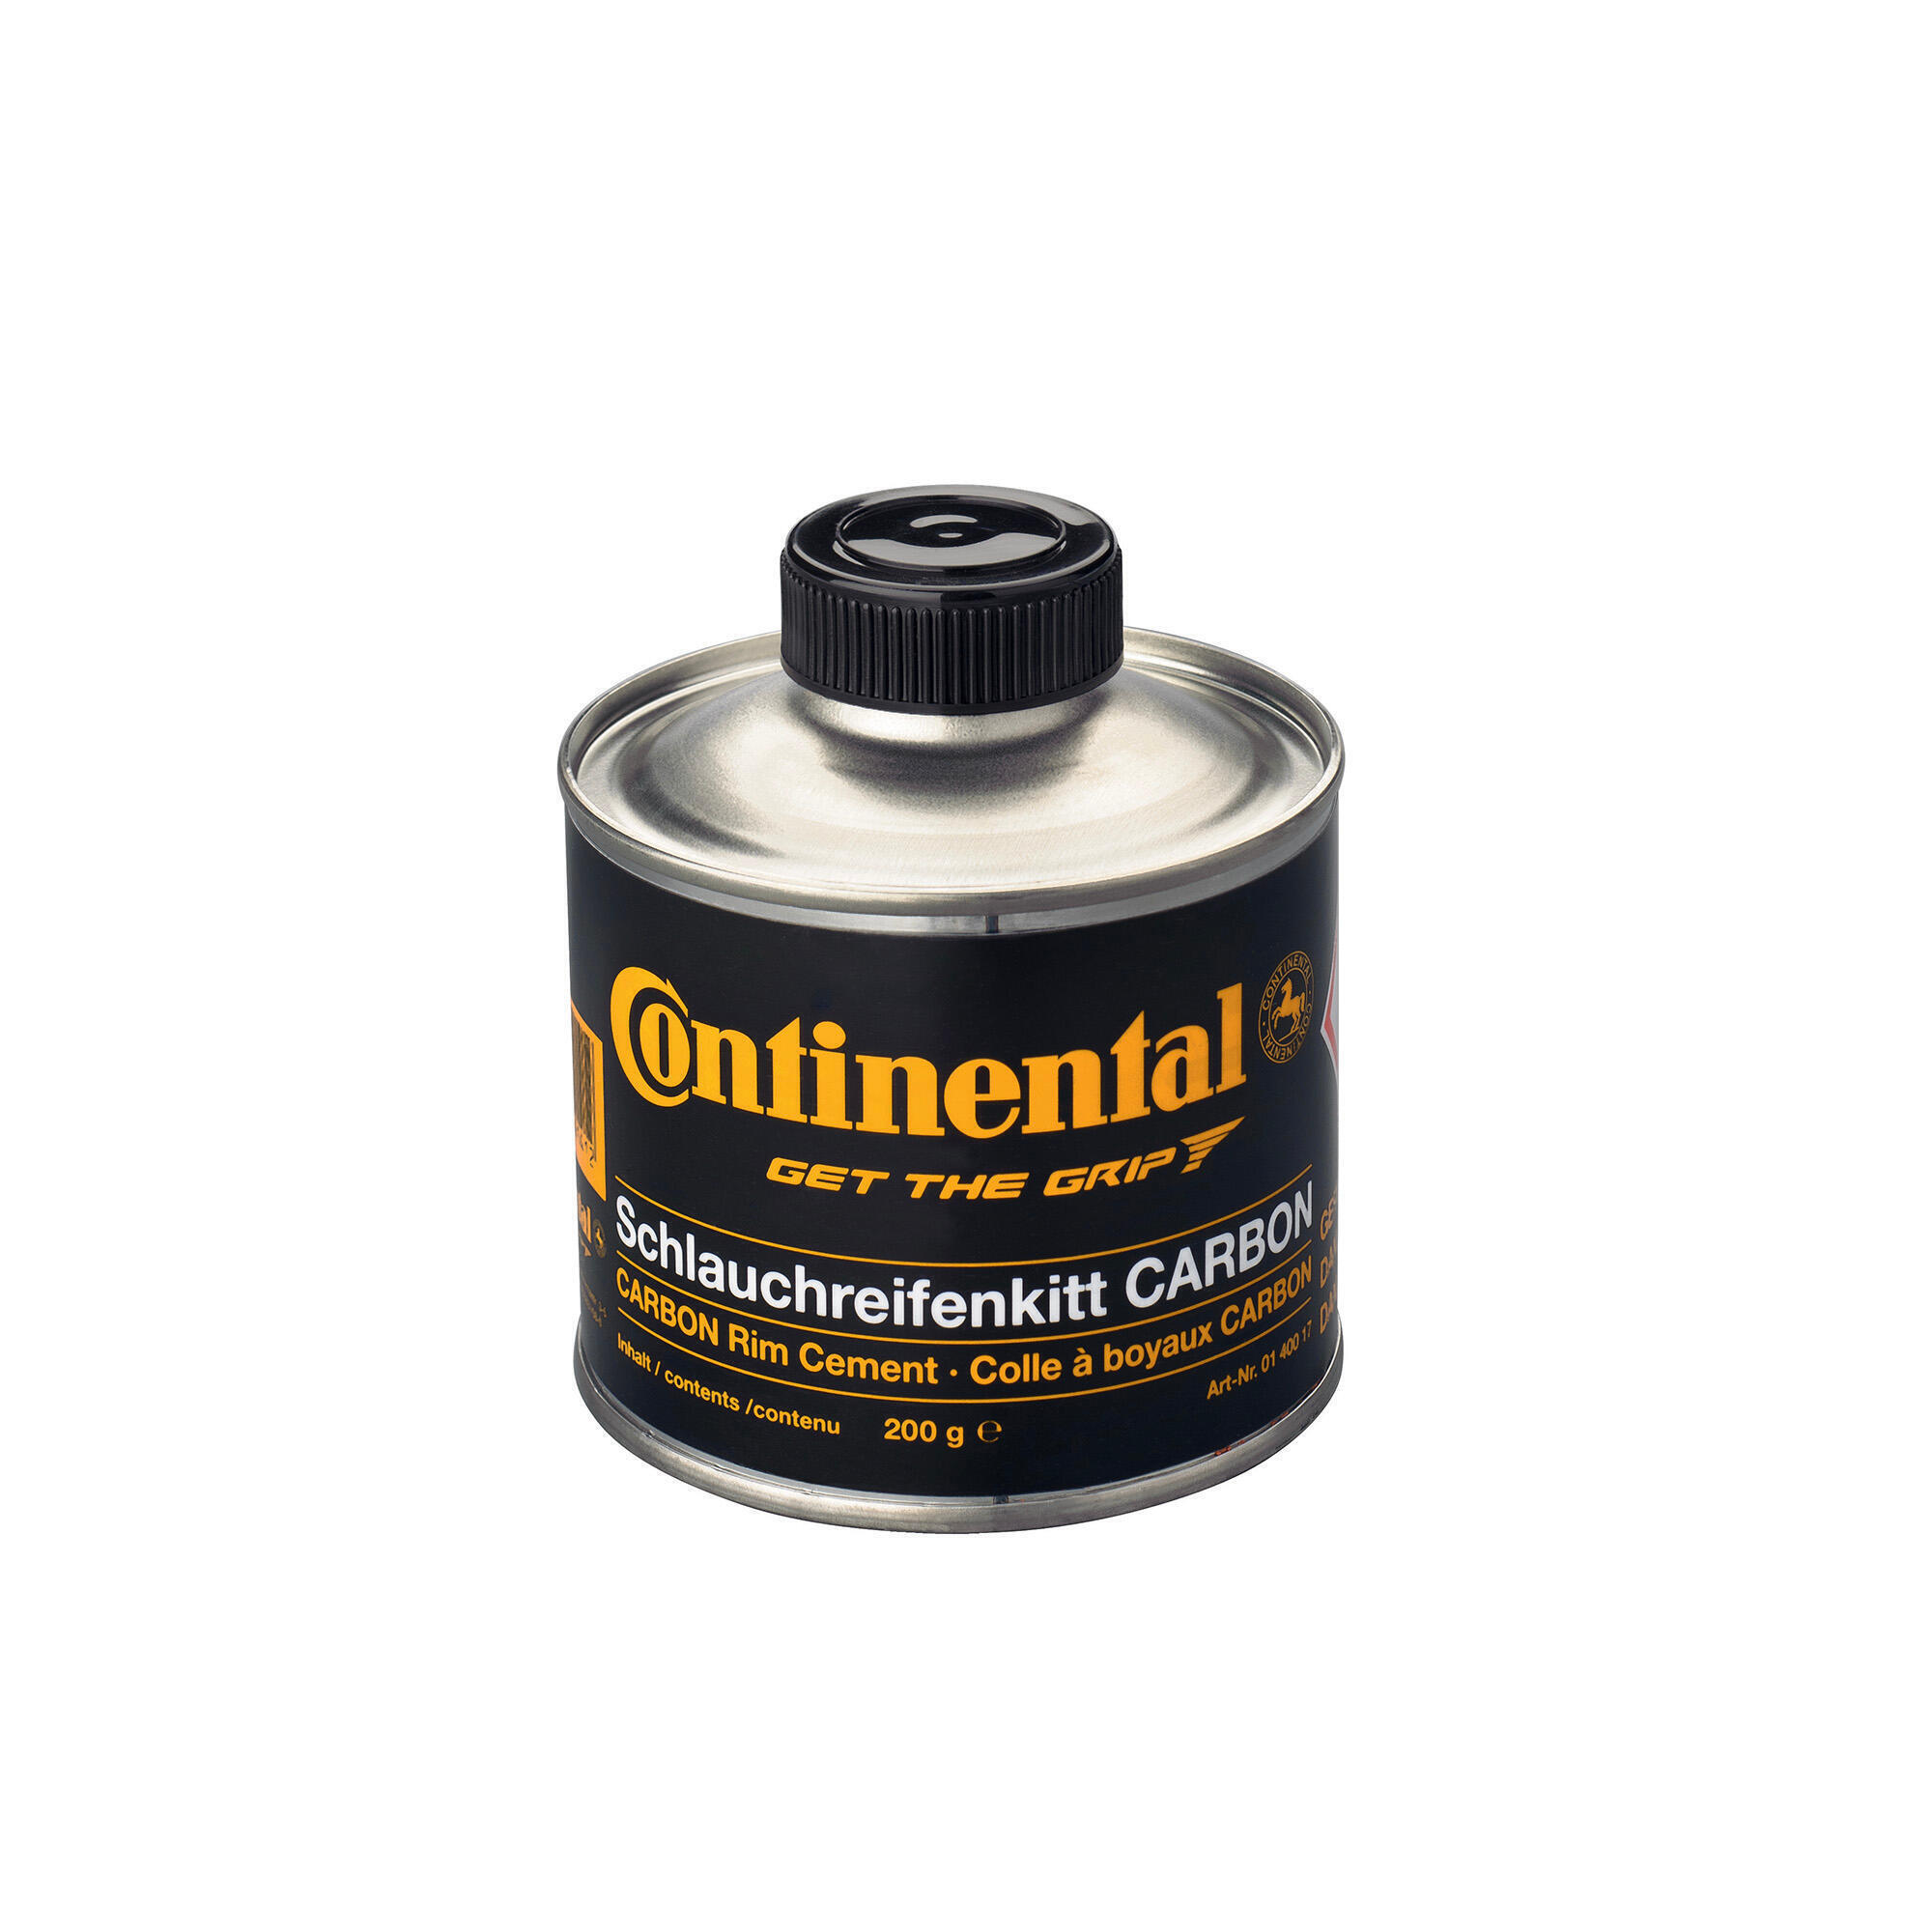 CONTINENTAL Tubular Rim Cement Carbon 200g Can Black 200G Can